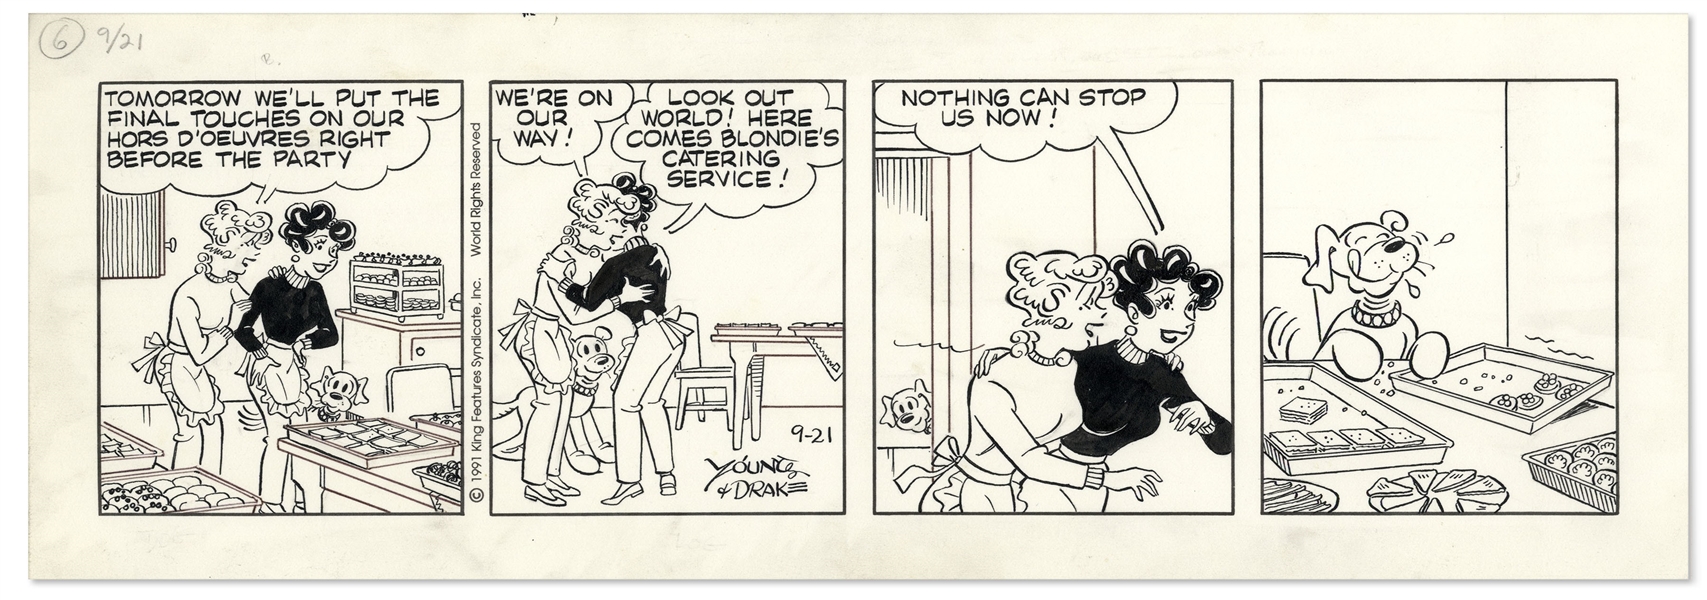 ''Blondie'' Comic Strip From 1991 -- A Glitch in the Catering Business